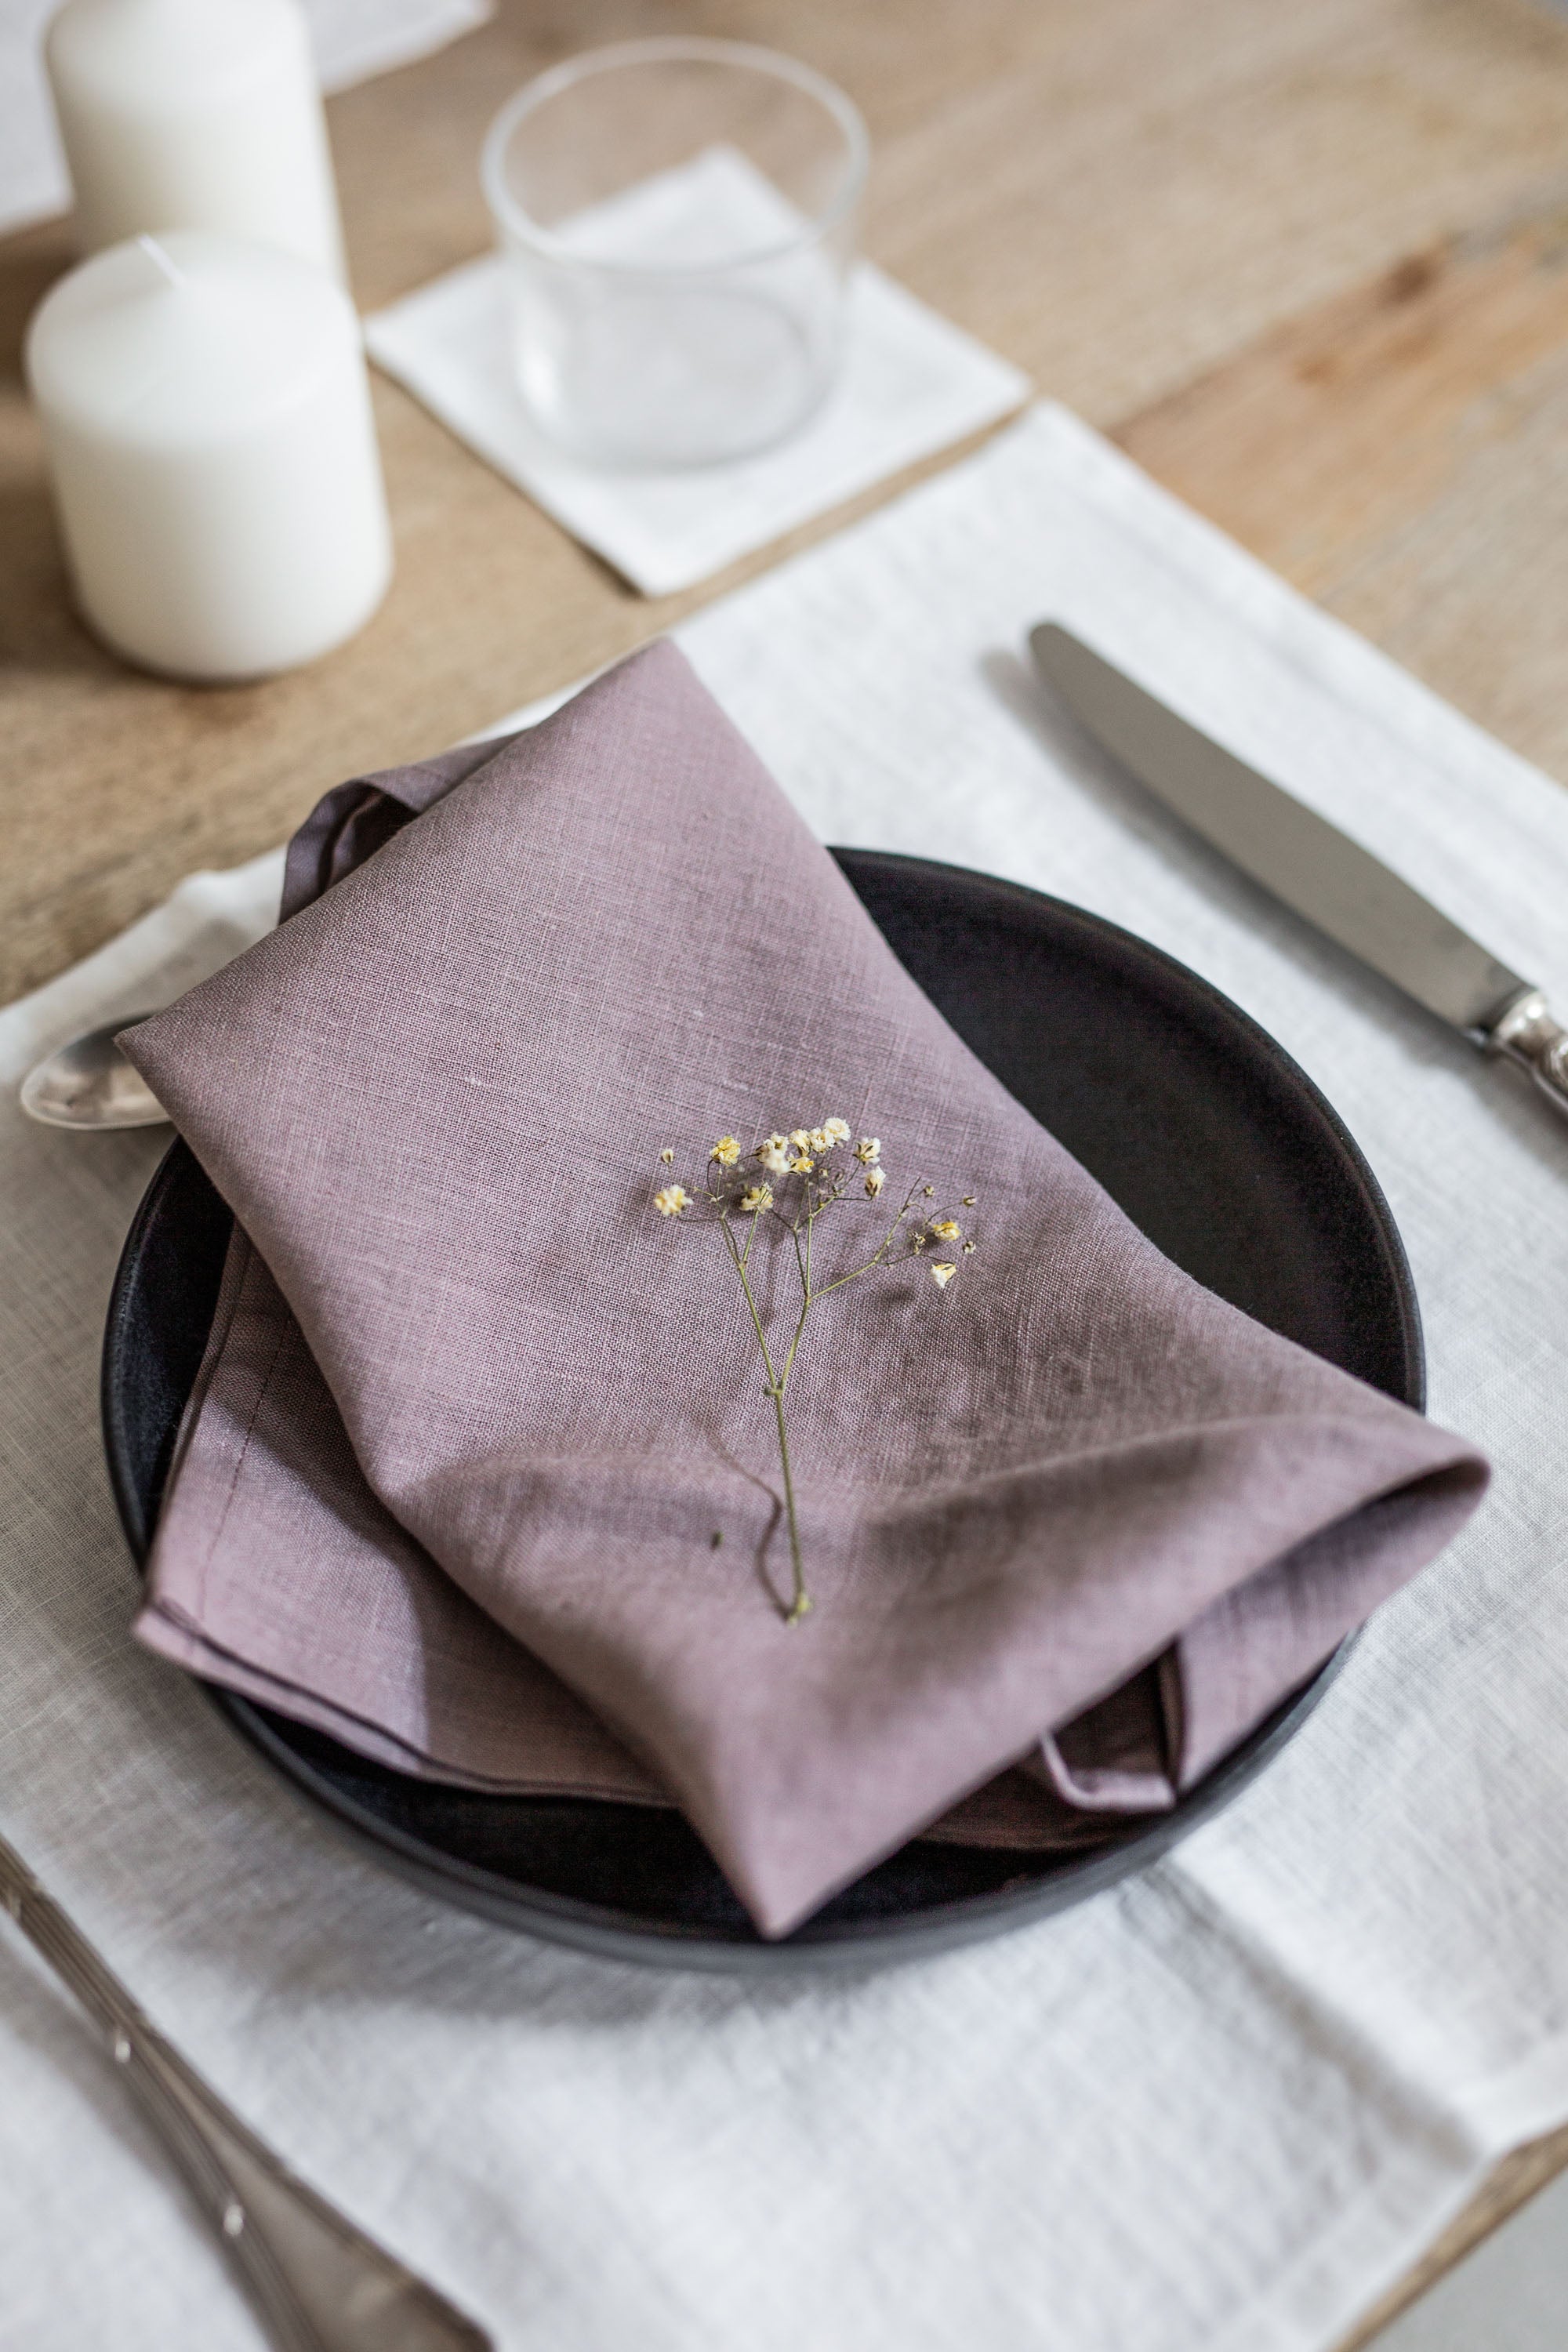 Set Dinner Table With A Focus on Rosy Brown Linen Napkins By AmourlInen 